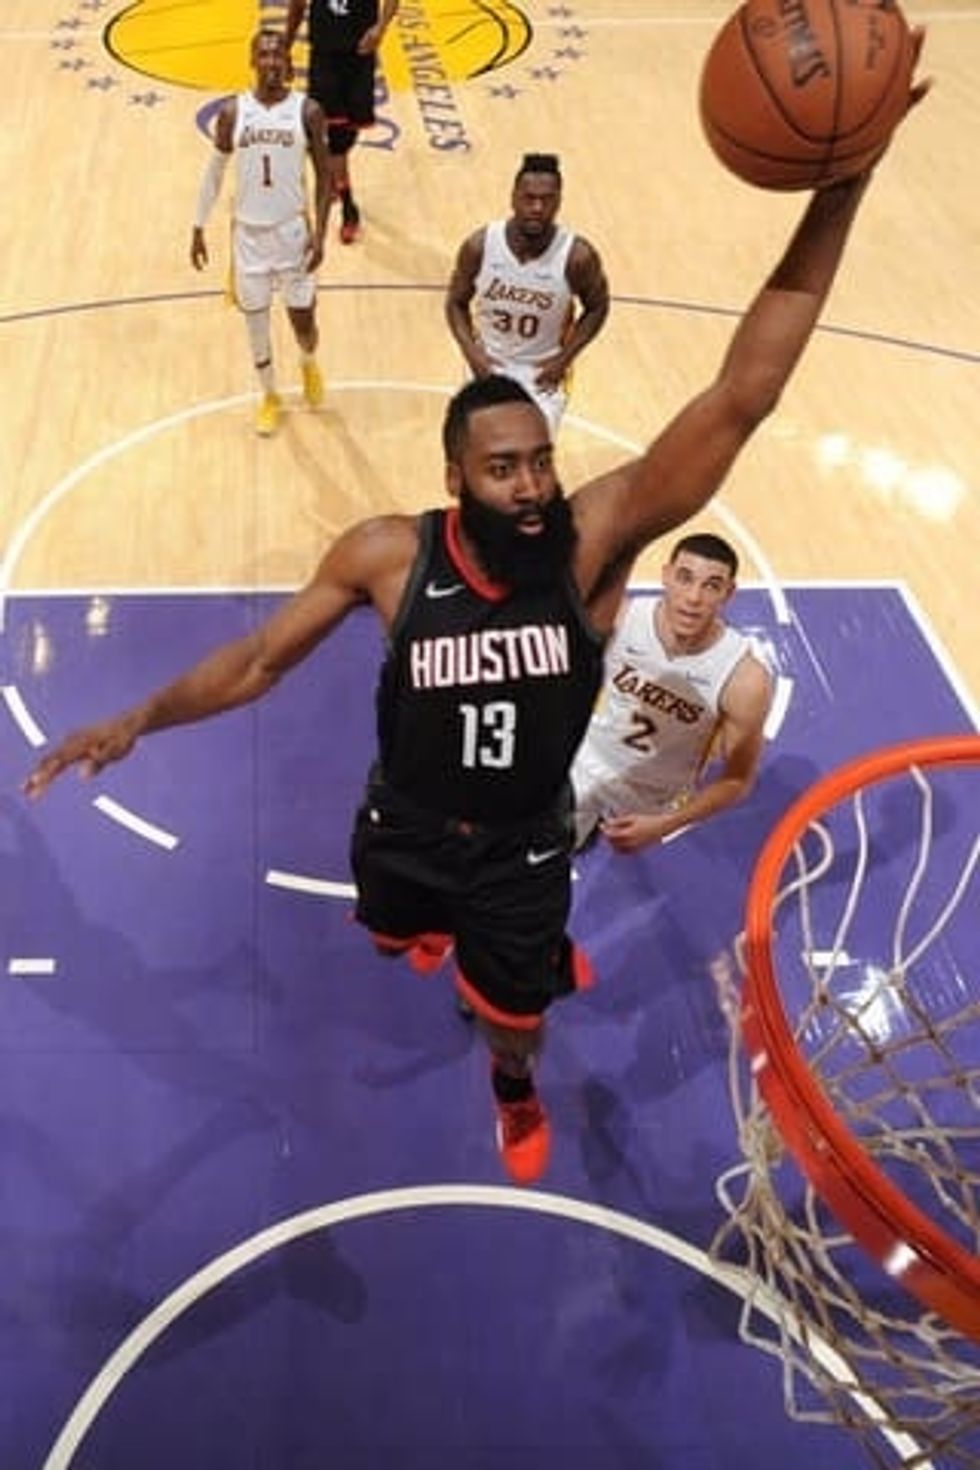 Pallilo's View: Why aren't the Rockets creating more of a buzz?